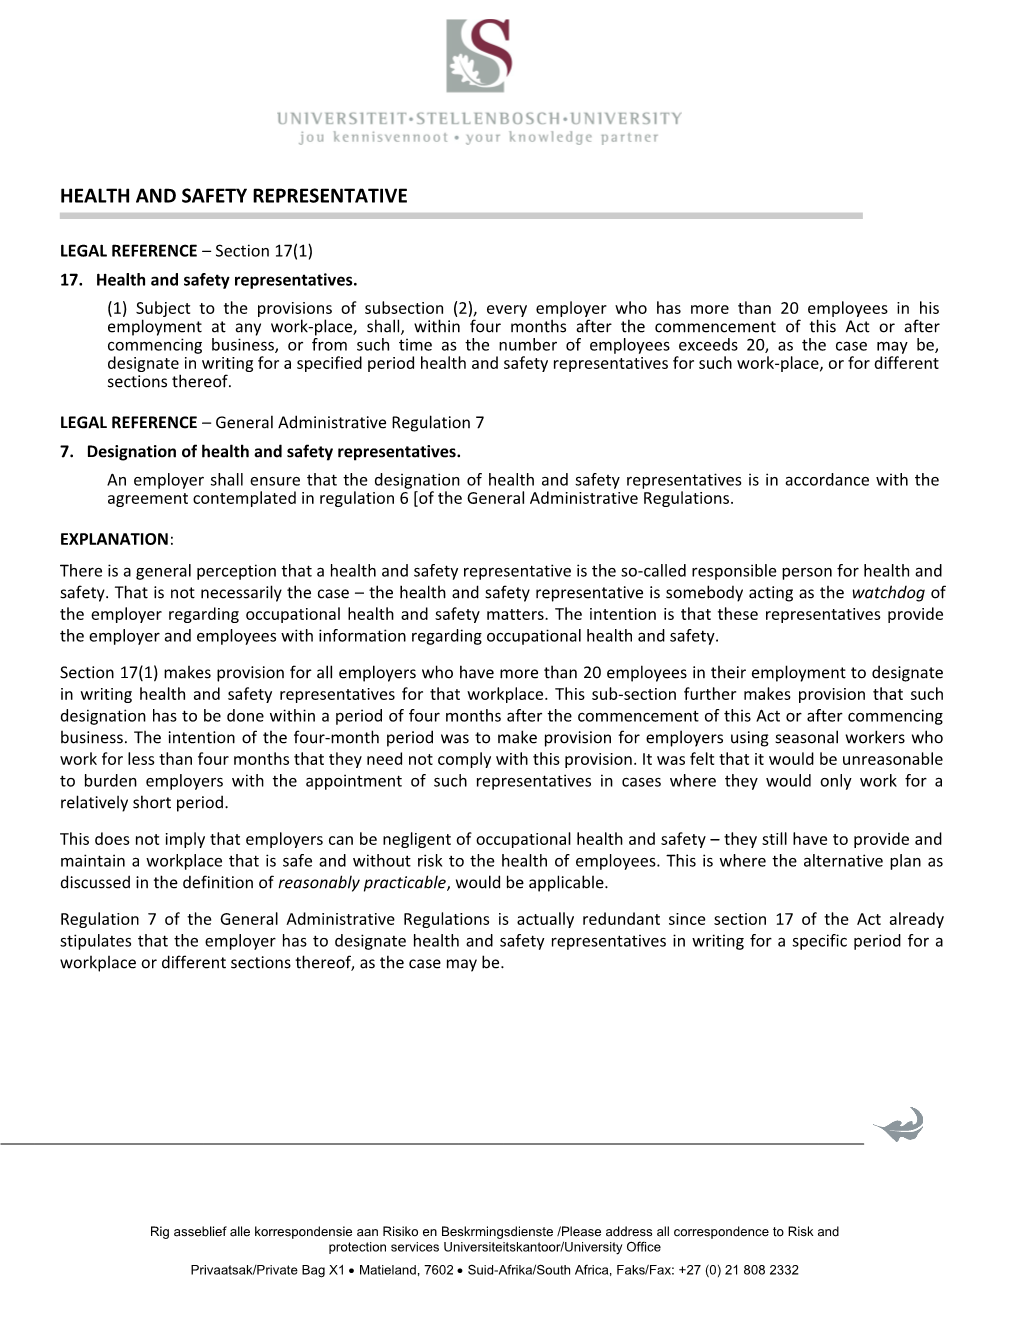 Appointment of Health and Safety Representative